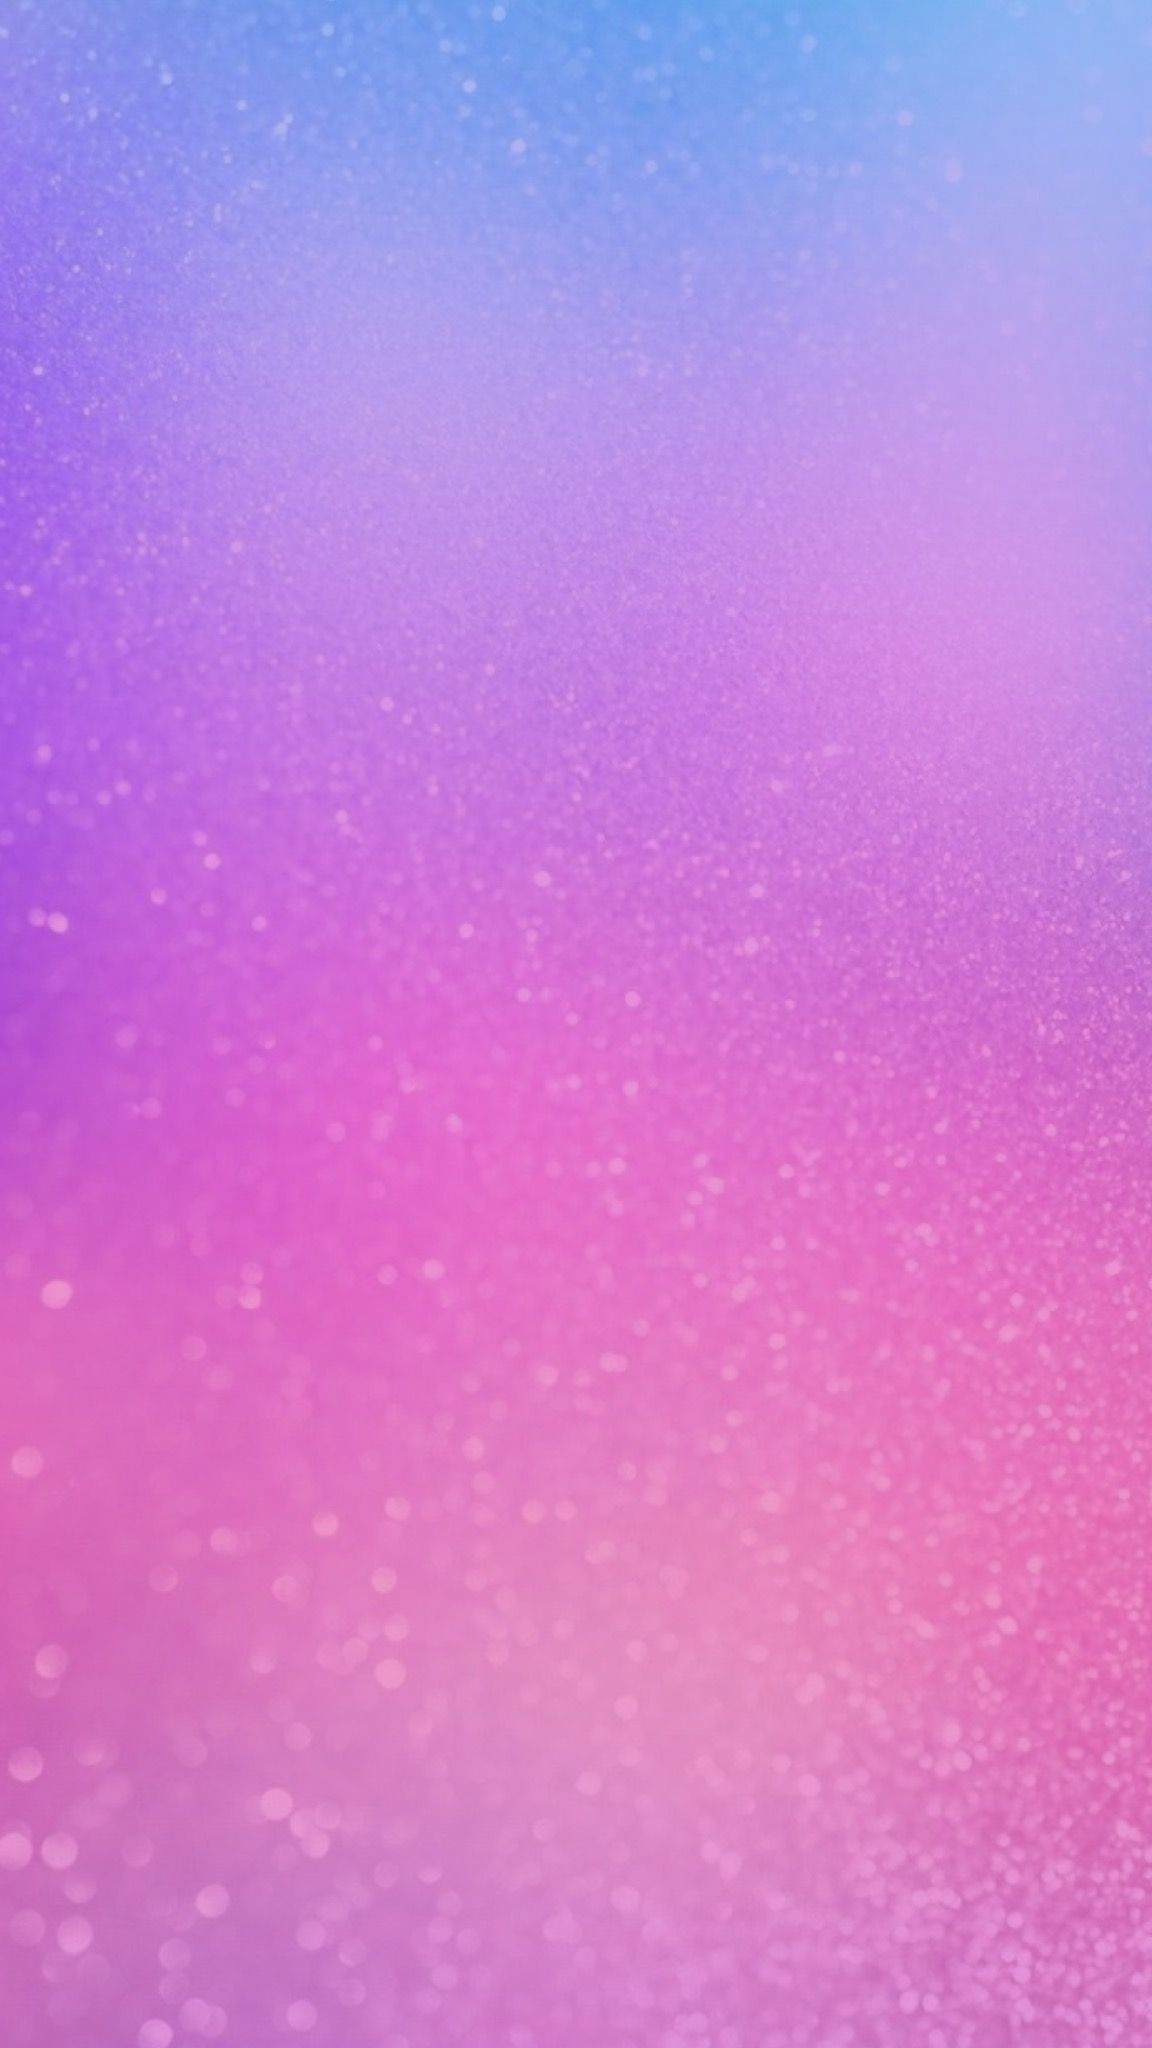 1152x2048 Original image not by me! I just made the ombr&Atilde;&copy;/gradient. Glitter, sparkle, sparkly, pink, pur&acirc;&#128;&brvbar; | Purple ombre wallpaper, Iphone wallpaper glitter, Cute backgrounds